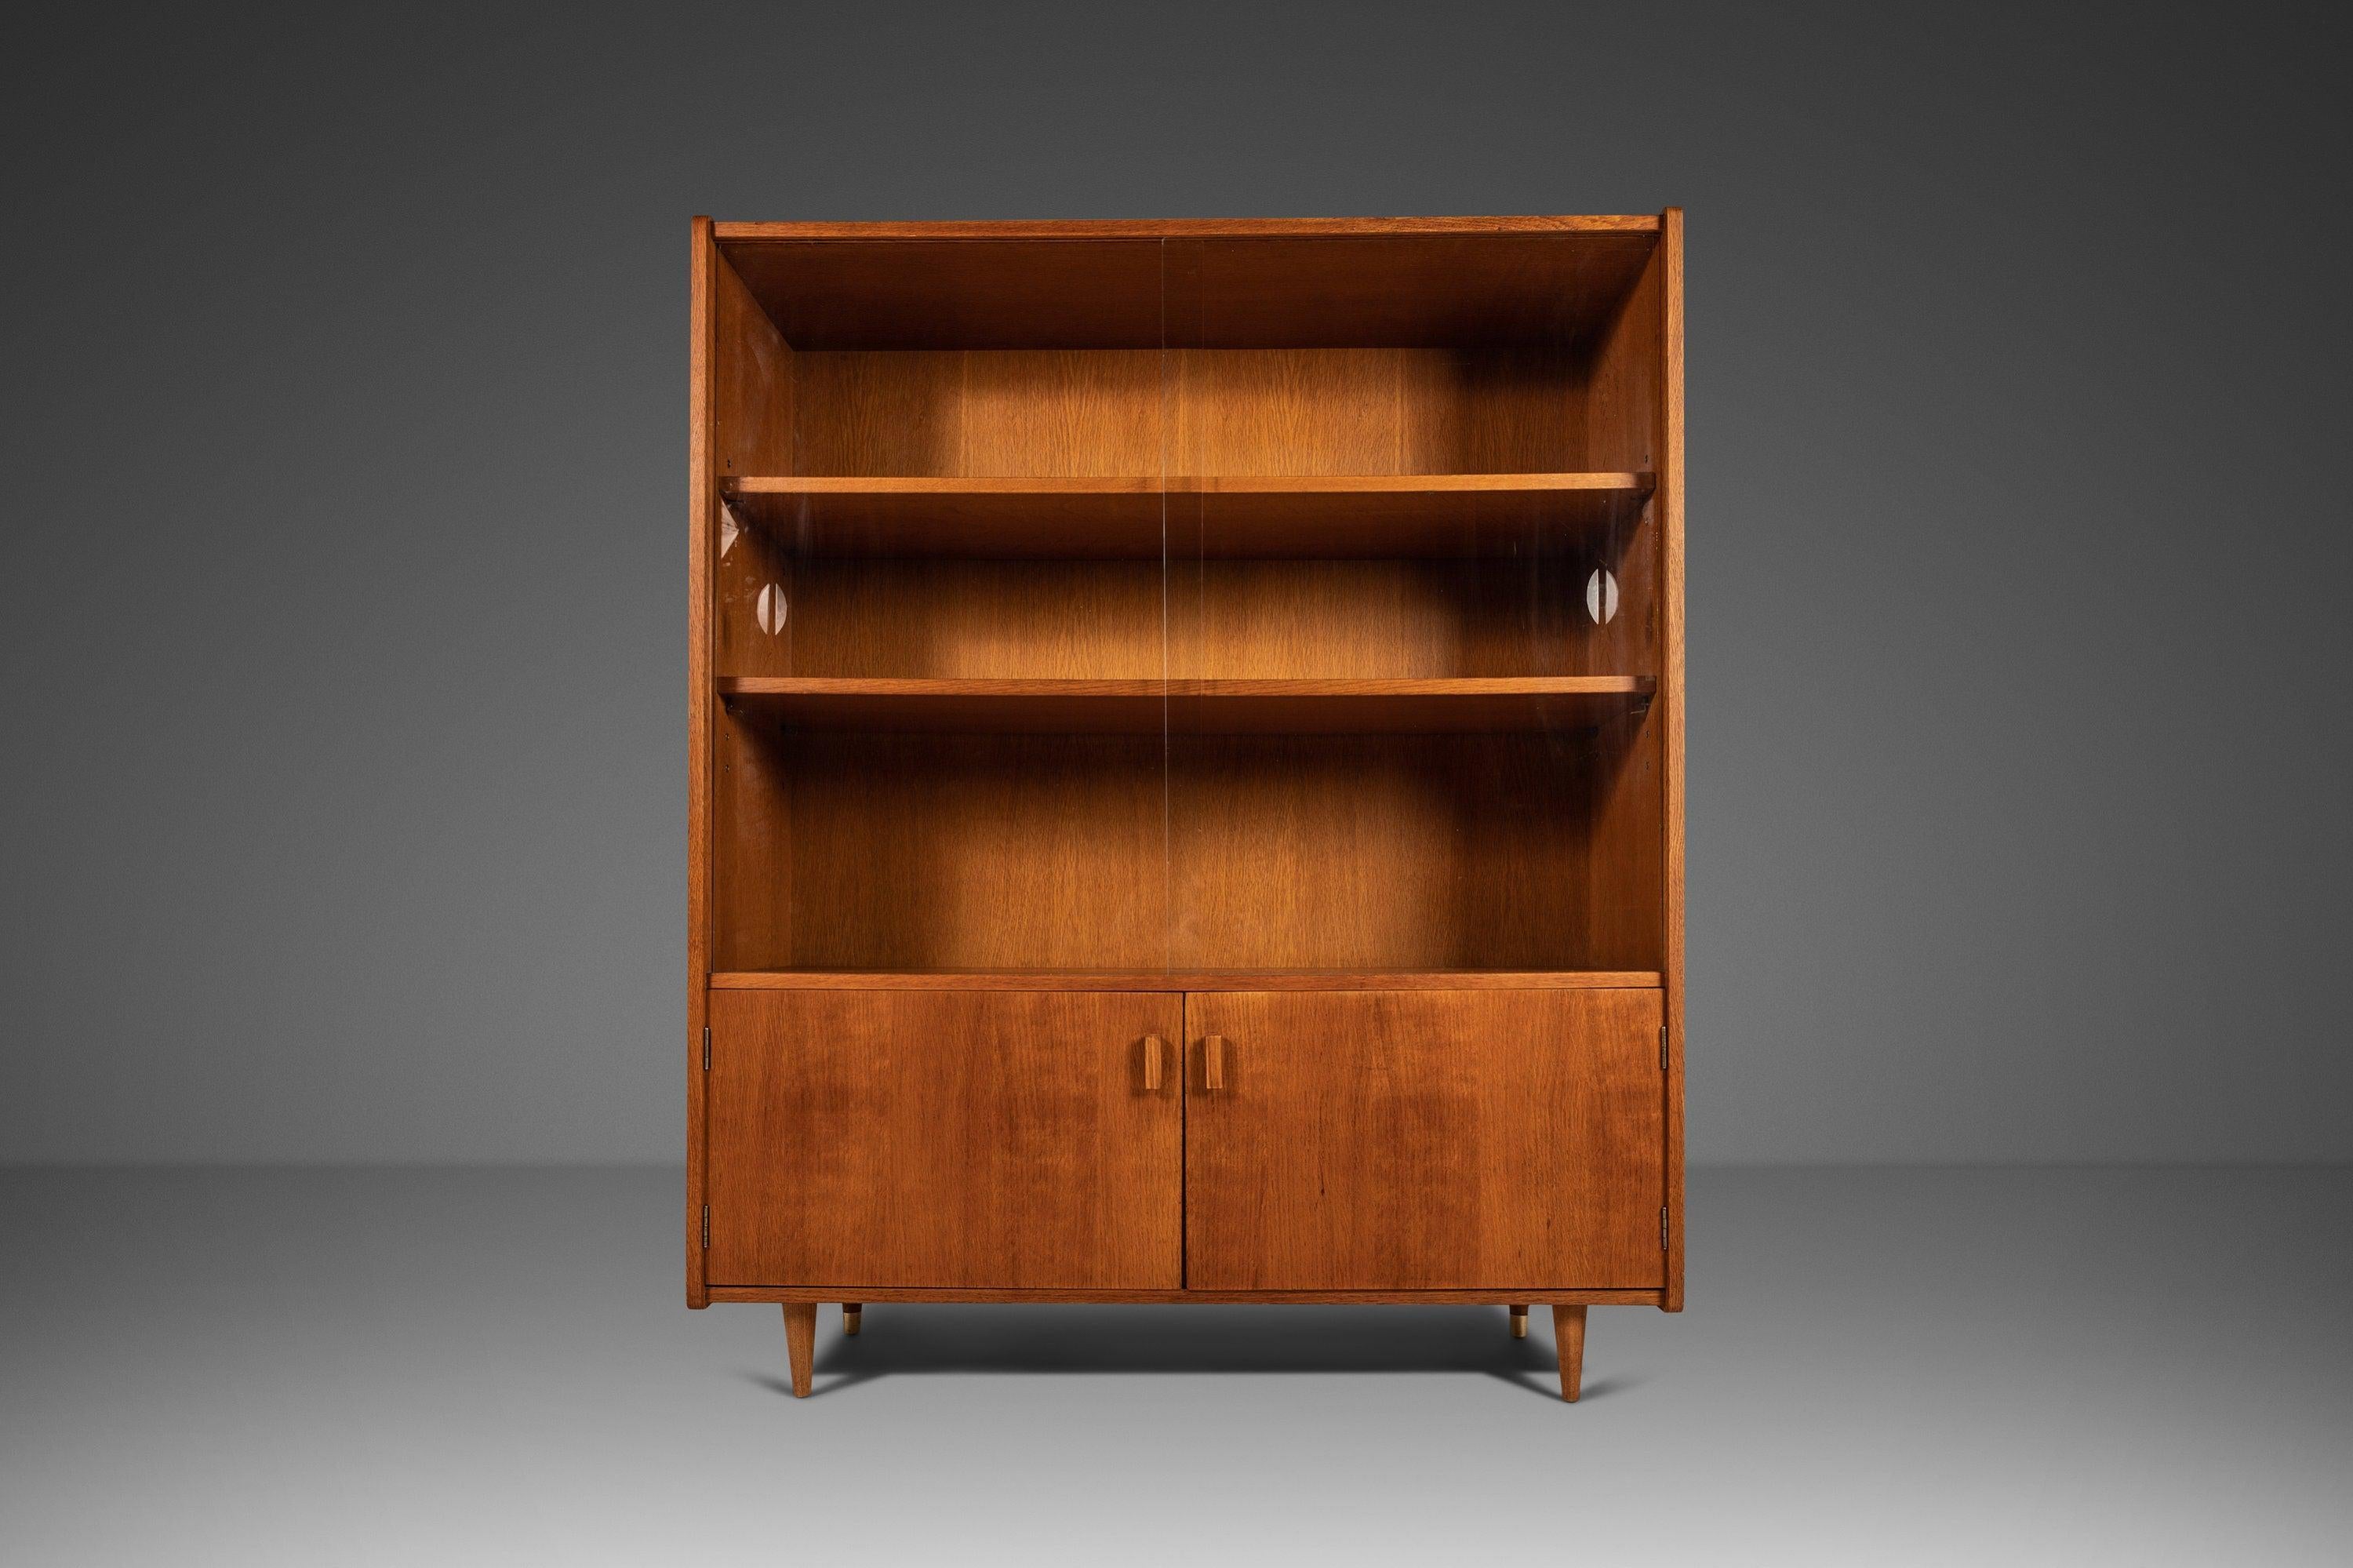 Petite yet substantial this splendid Mid Century Modern display cabinet is perfect for those who are limited on space but unwilling to compromise on style and functionality. Built from a mix of solid and veneered European walnut this cabinet is full